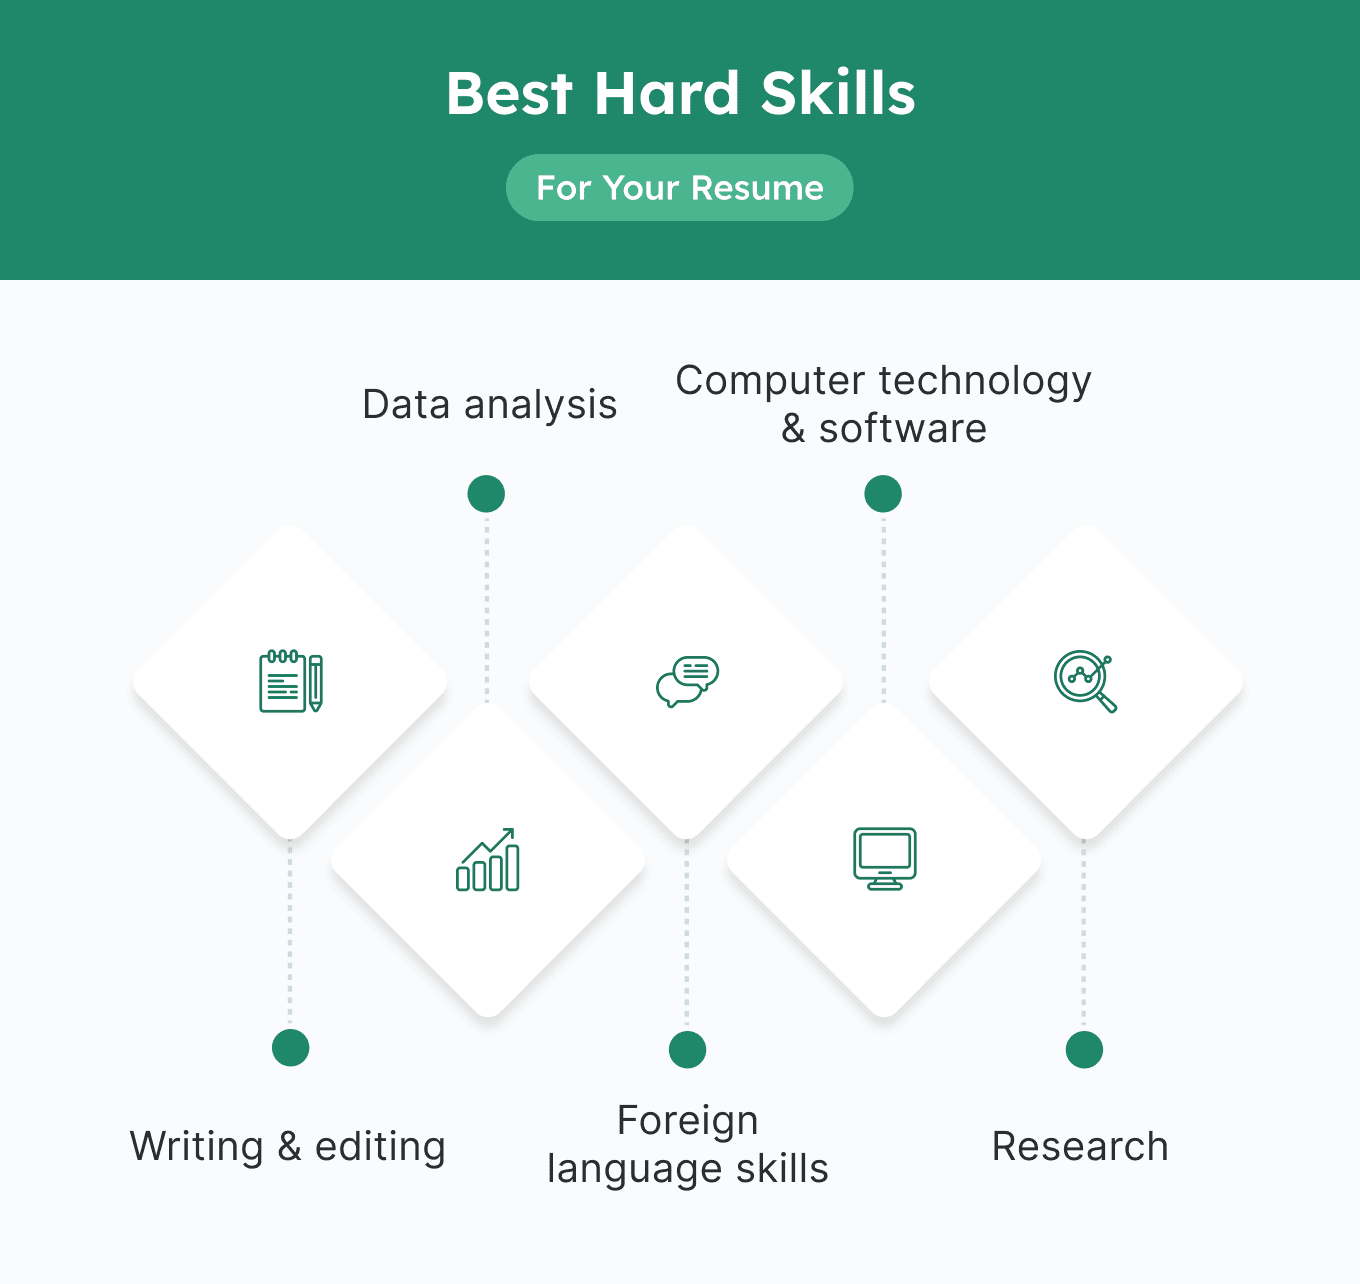 Graphic depicting 5 of the best hard skills for your resume.